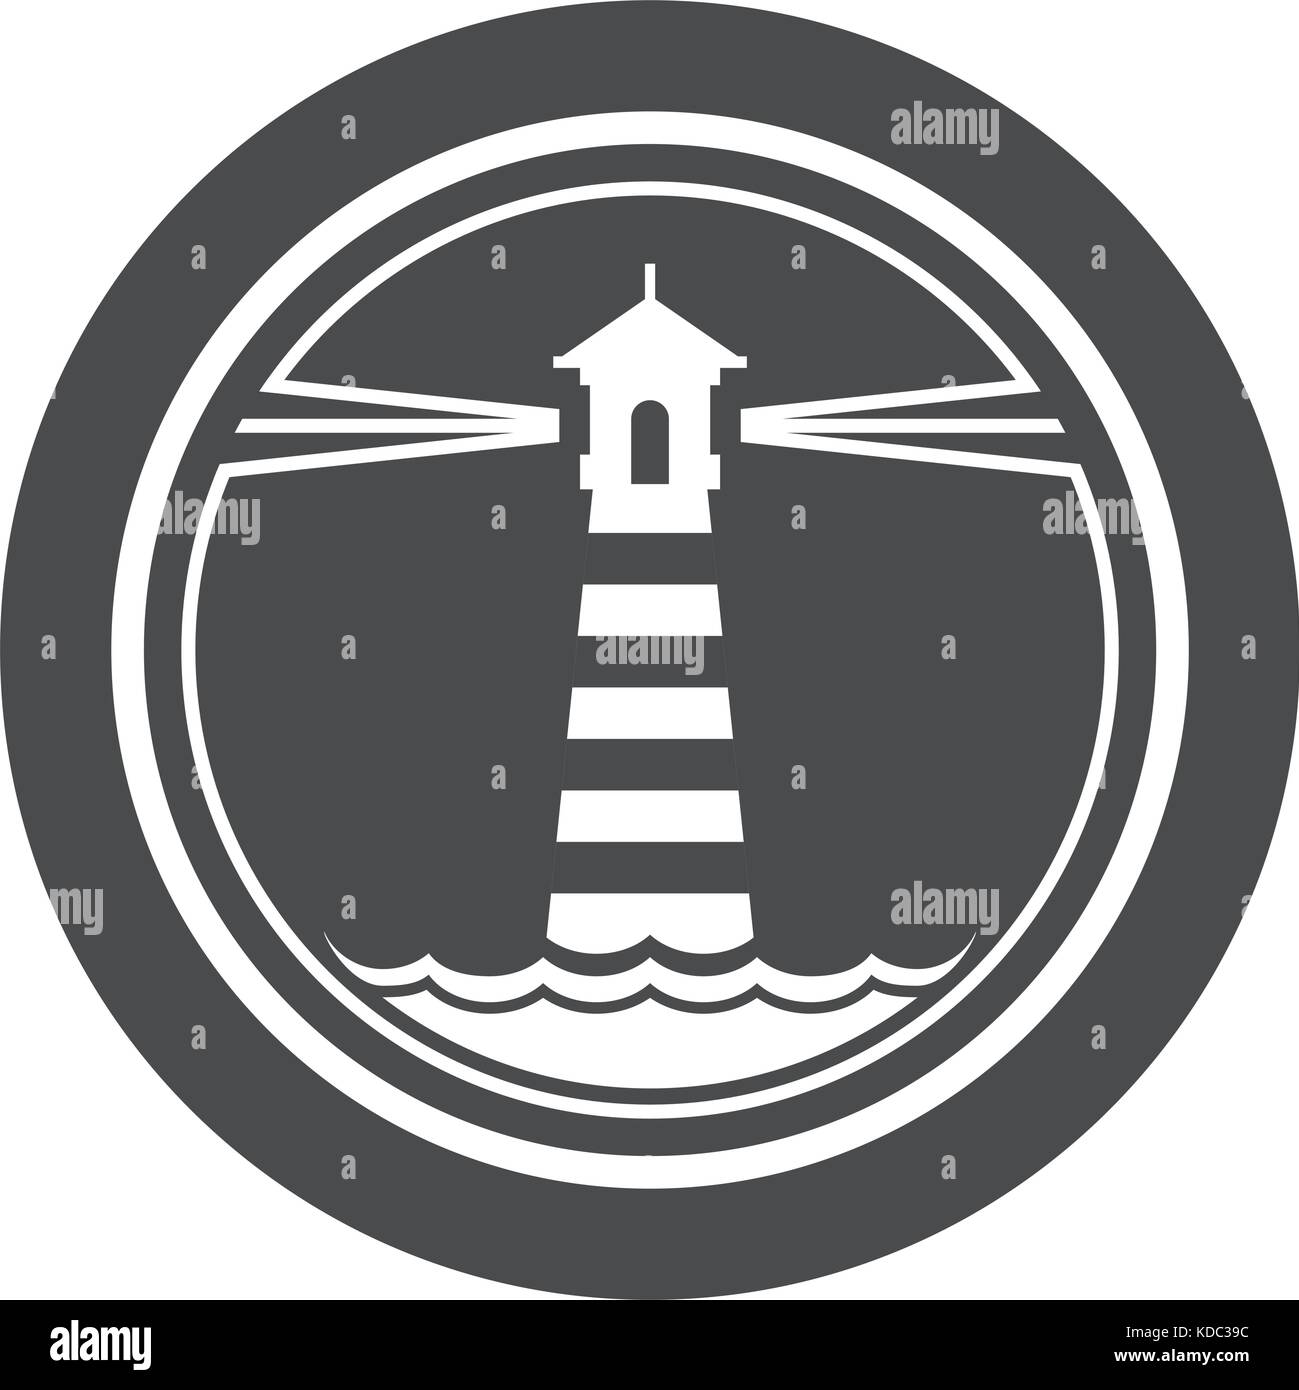 Maritime lighthouse icon with waves Stock Vector